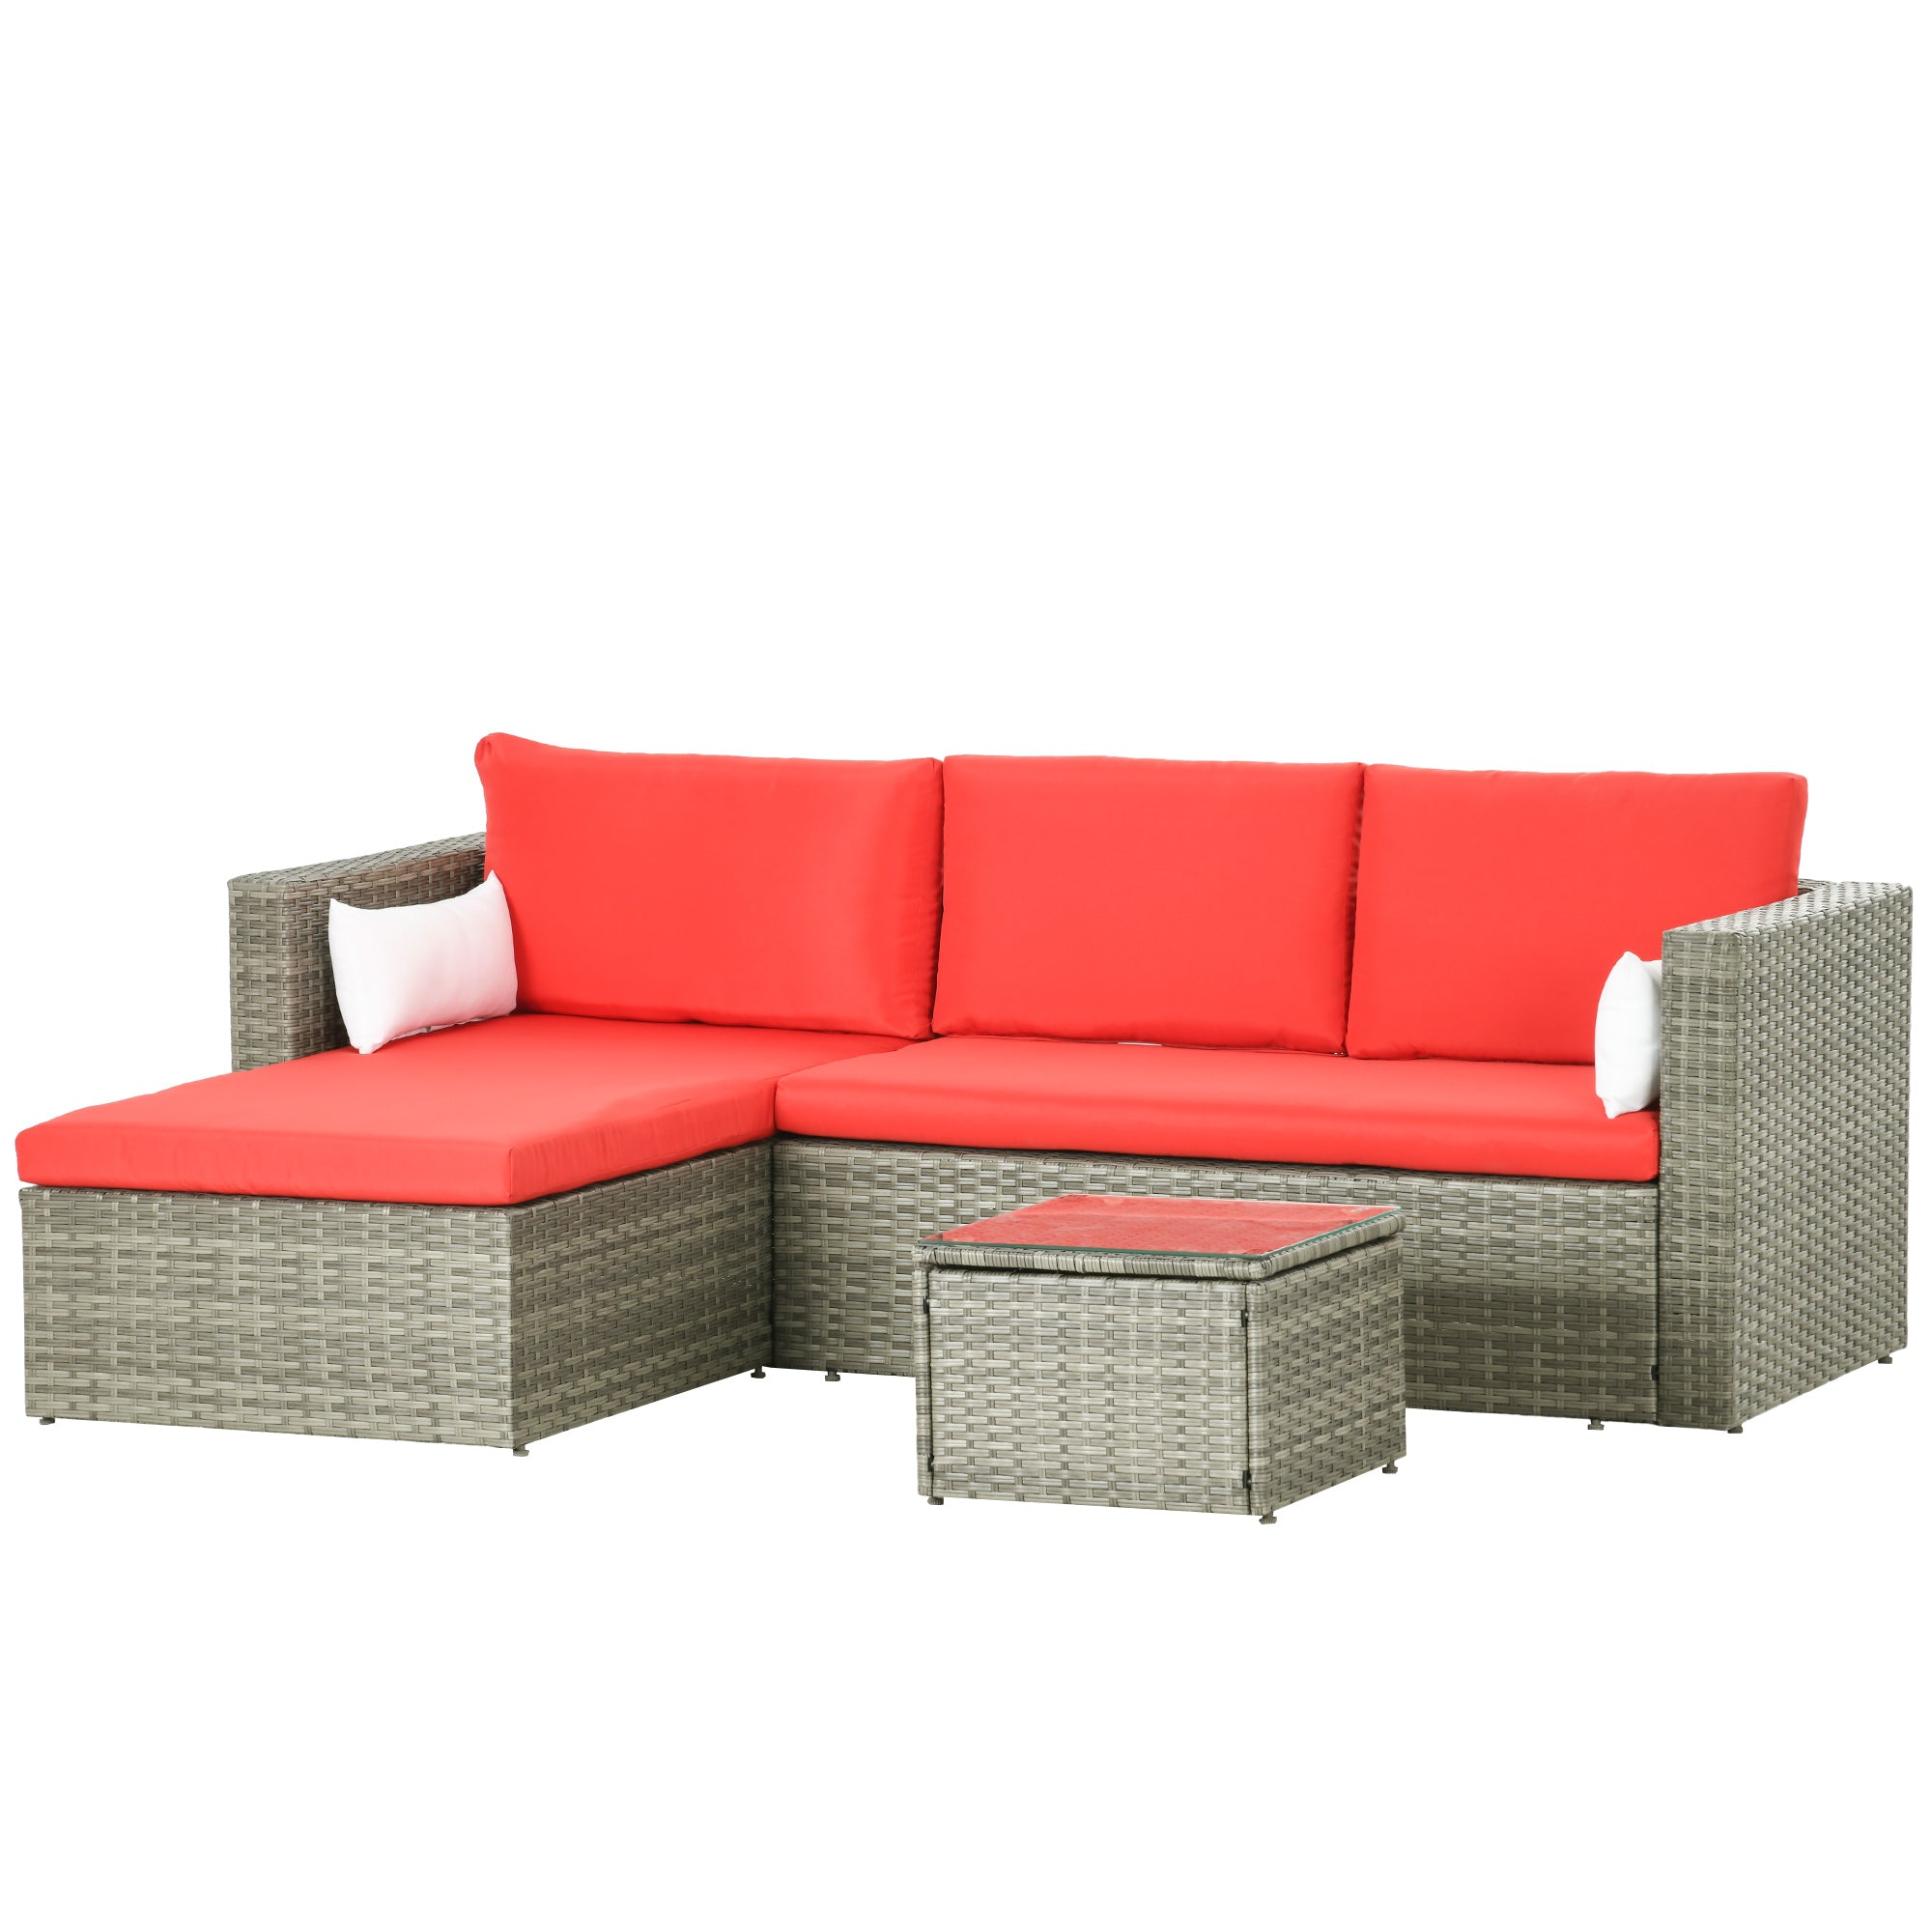 3pcs Modern Rattan Sofa Set, Wicker Patio Furniture Set with Coffee Table, Cushions, Pillows Patio Furniture Sets Red  at Gallery Canada